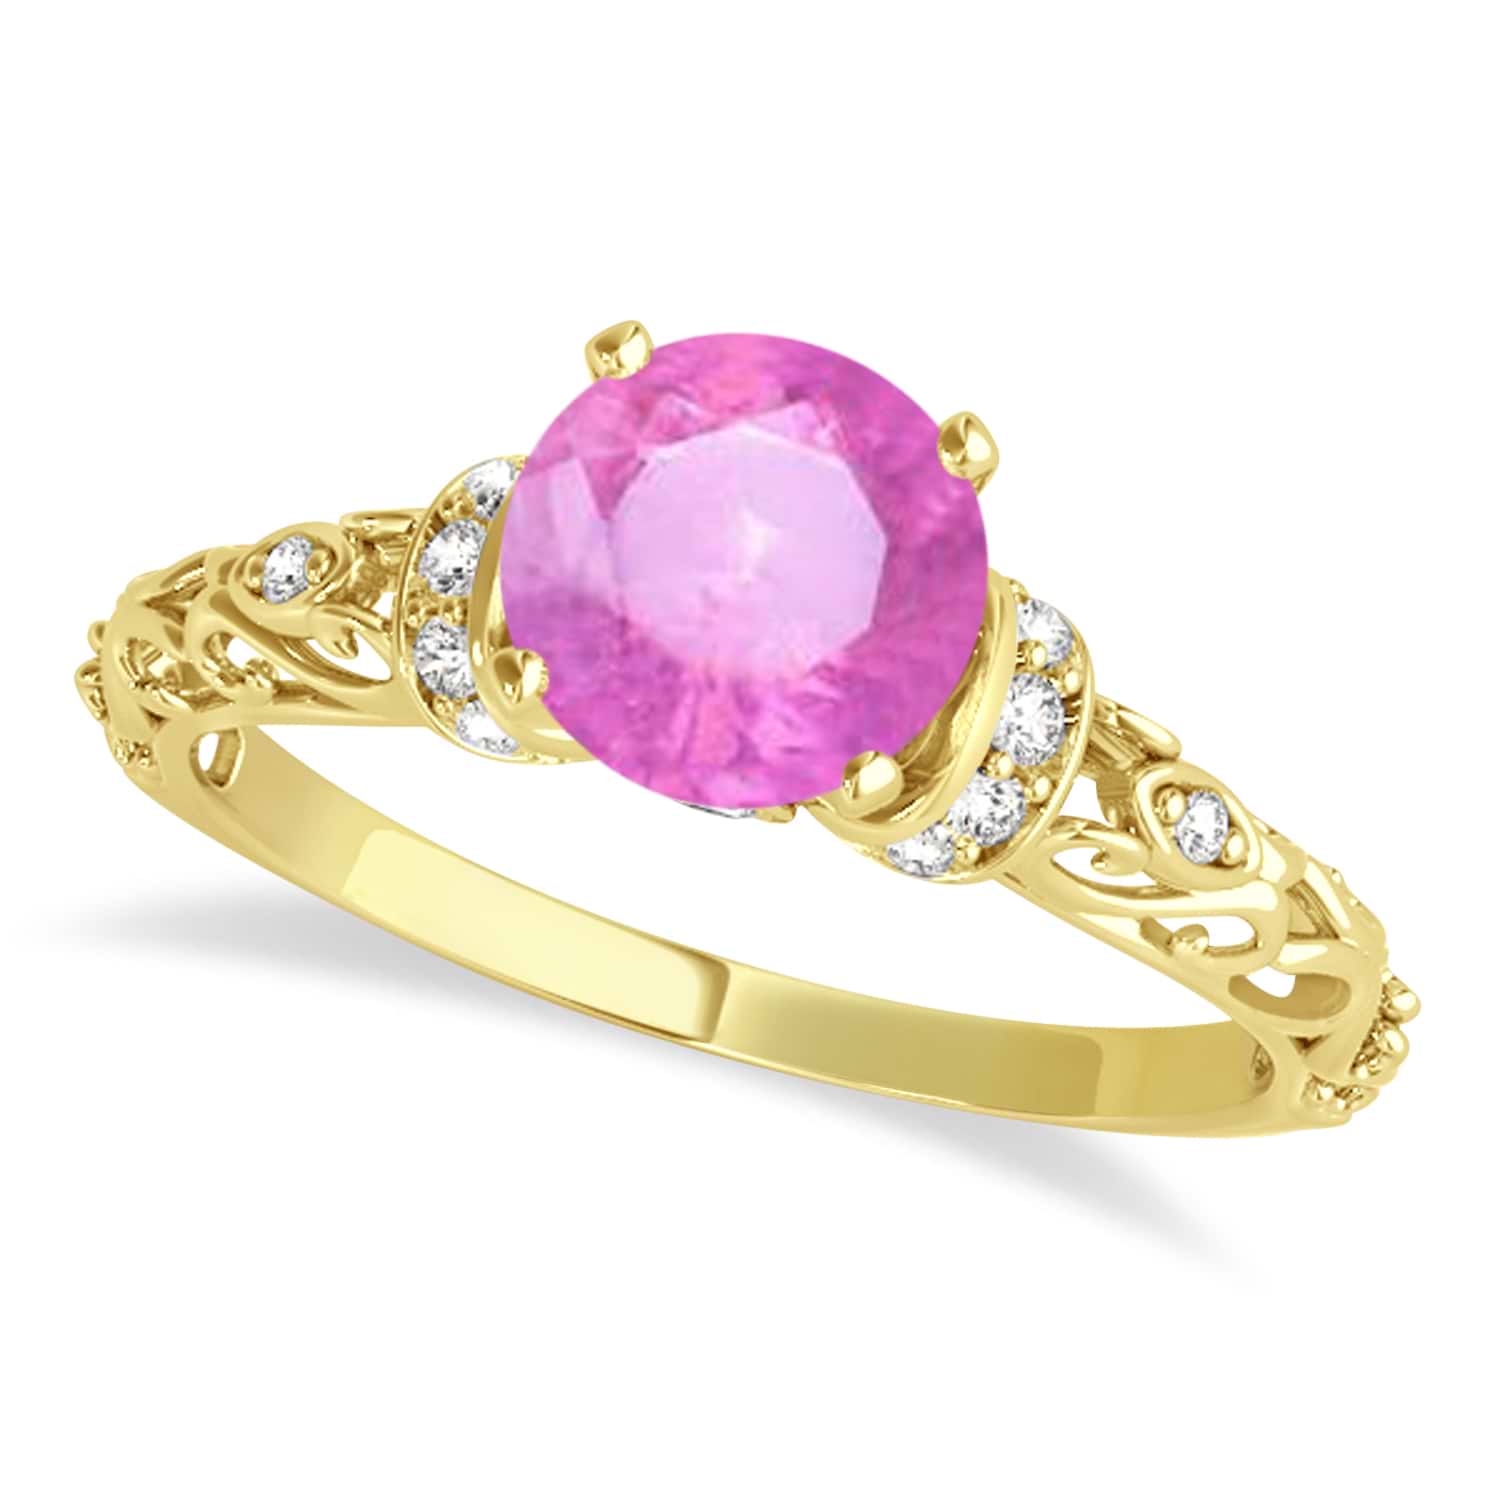 Pink Sapphire Diamond Antique Engagement Ring 14k Yellow Gold (1.12ct)